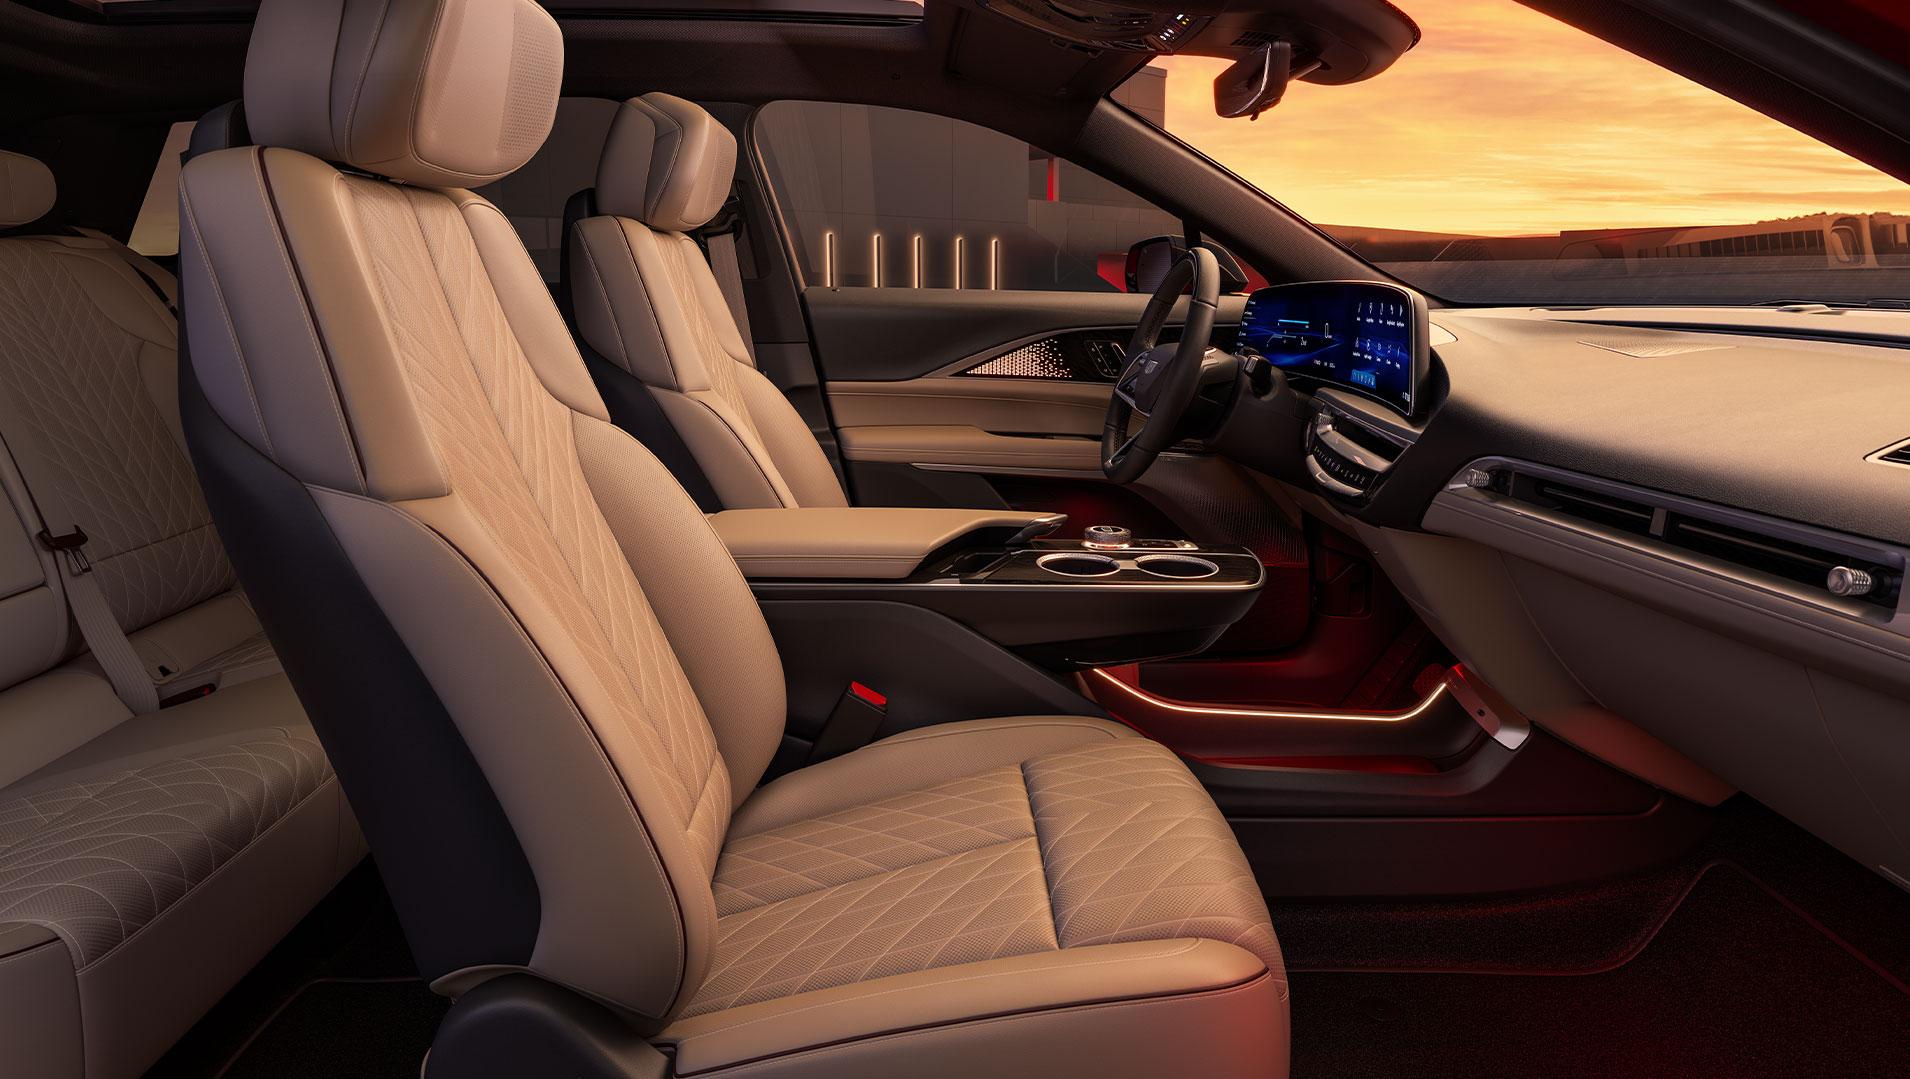 The Masterfully Crafted Interior of the Cadillac LYRIQ